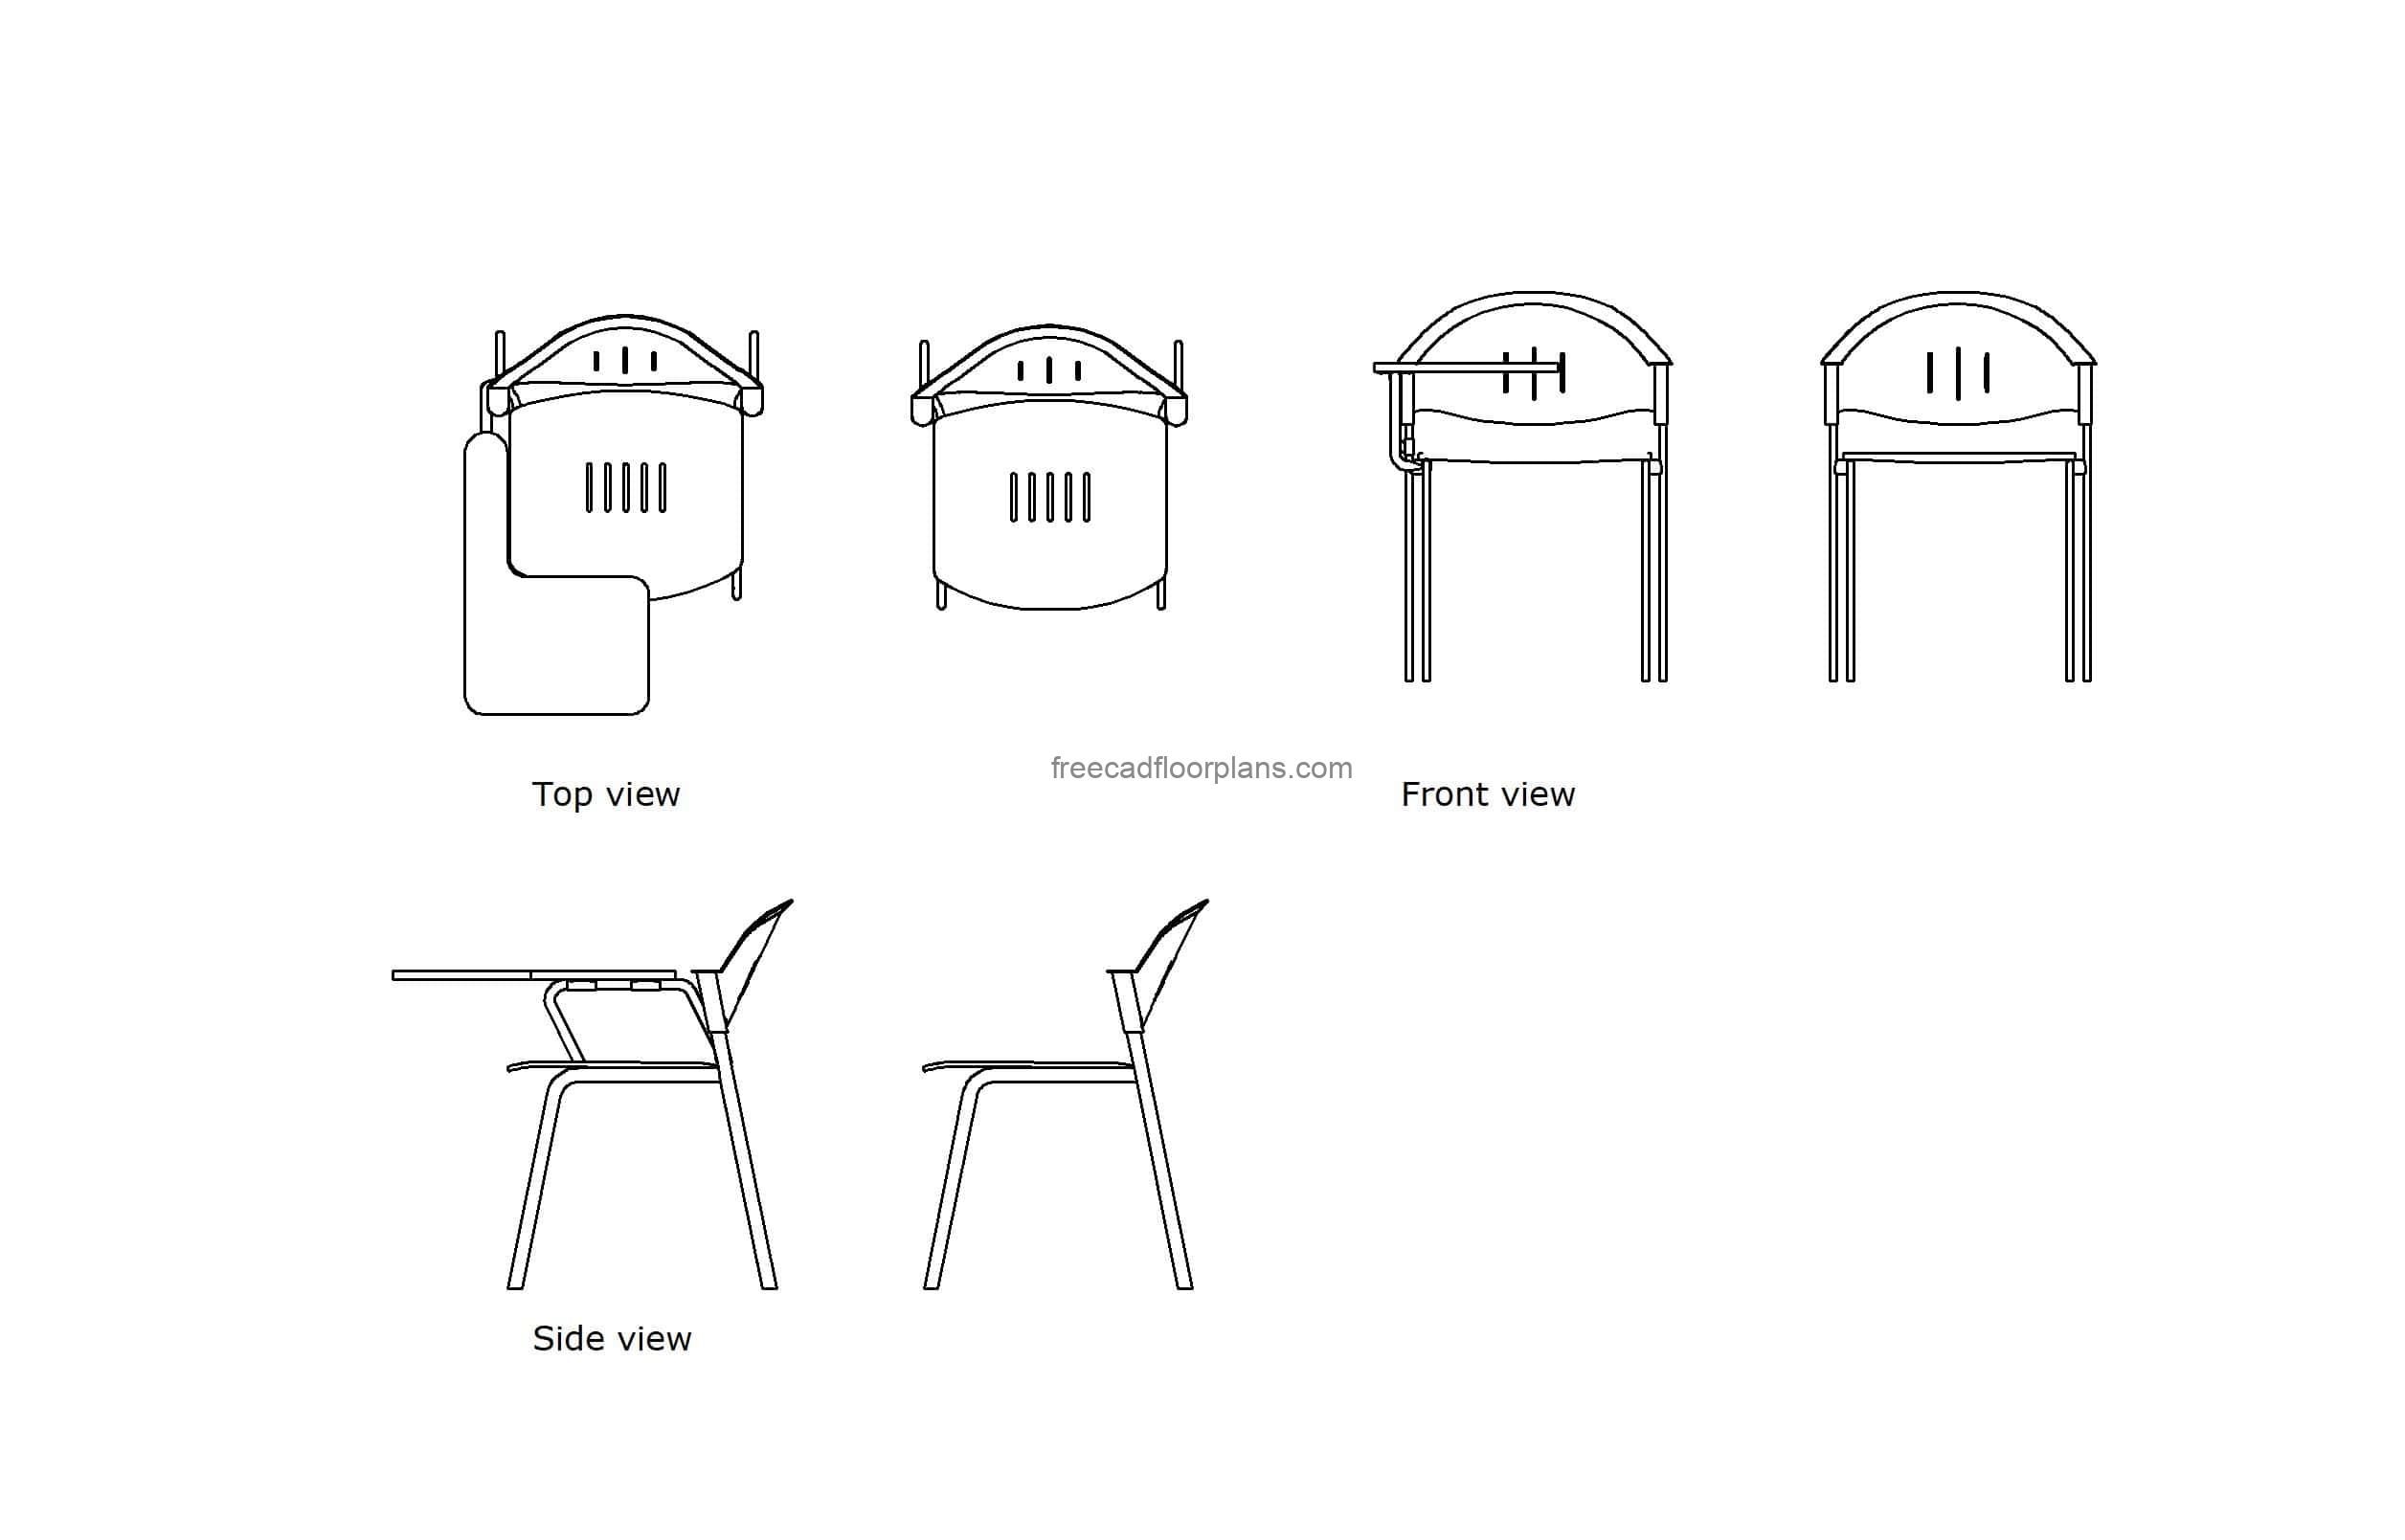 autocad drawing of different models of training room chairs, plan and elevation 2d vies, dwg file free for download